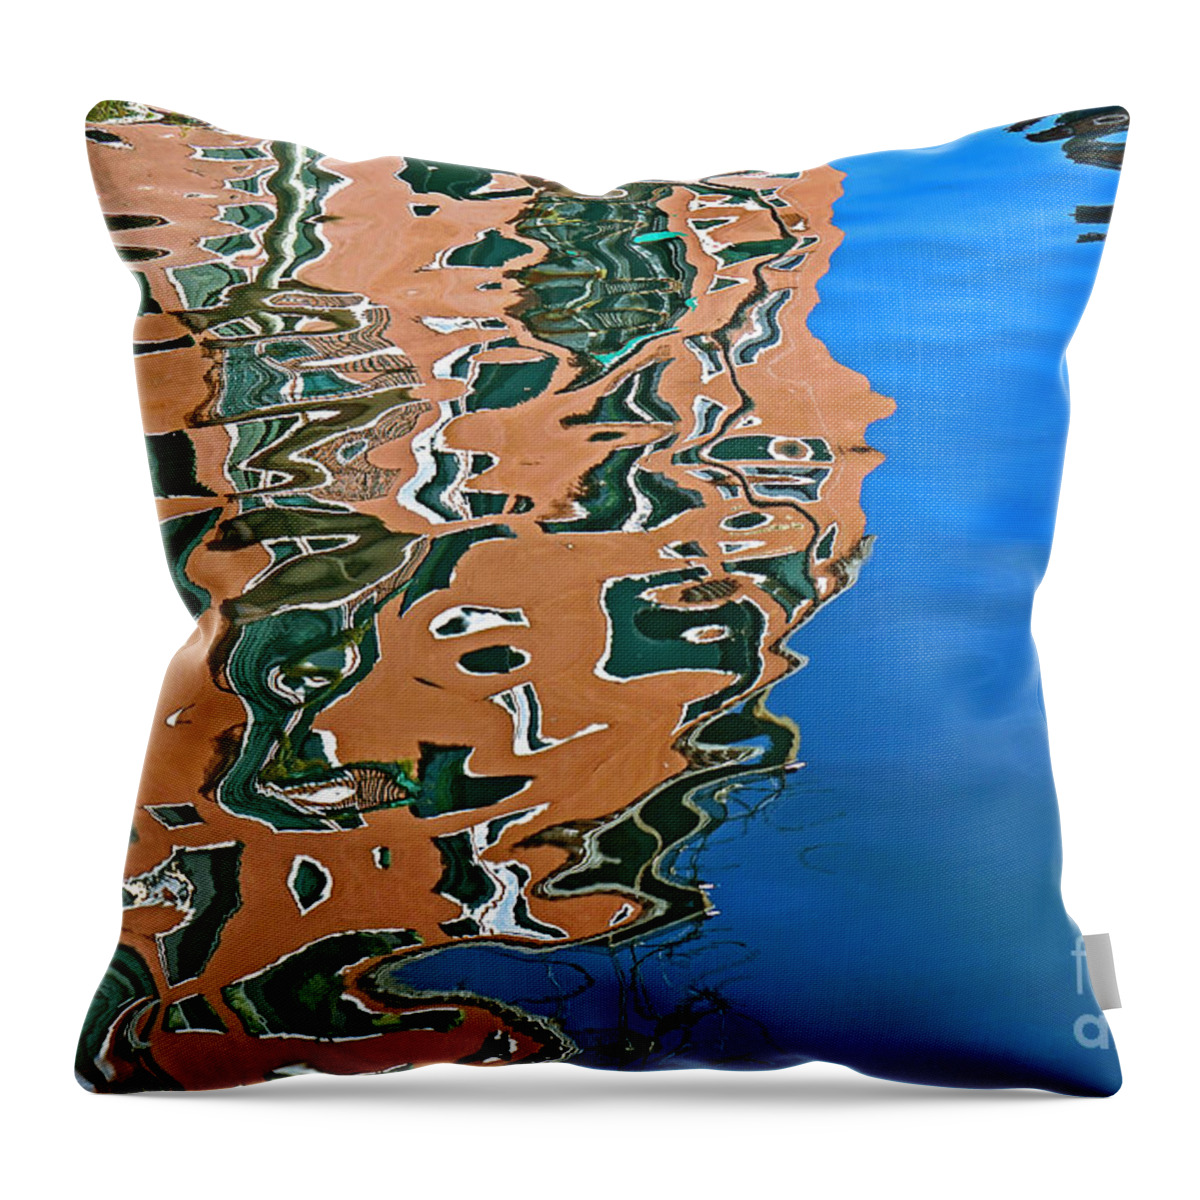 Venice Throw Pillow featuring the photograph Venice Canal Reflection by Michael Cinnamond